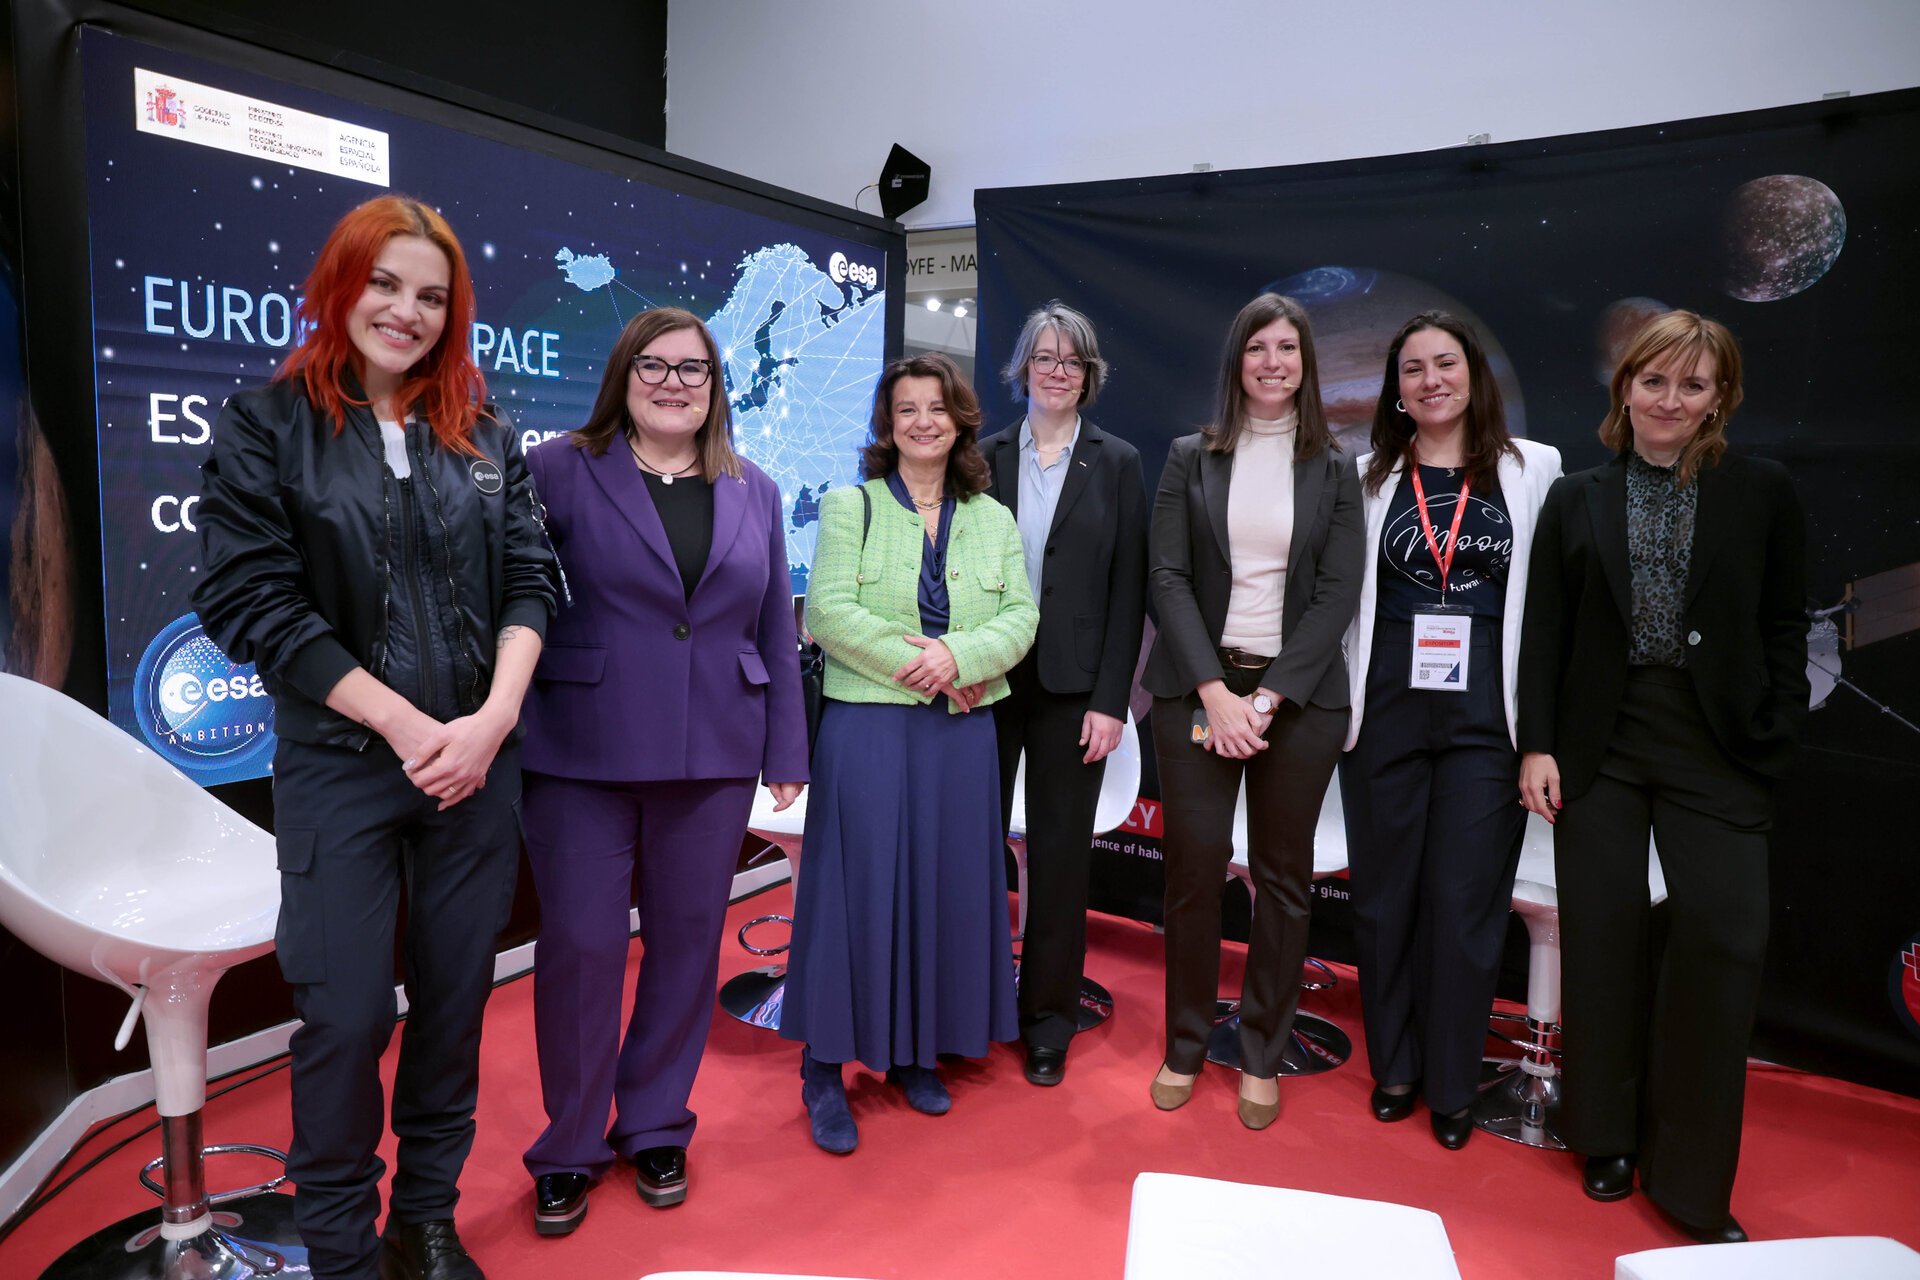 A round table discussion focused on the multidisciplinary aspects of space and highlighted the pivotal role of women in the sector. The expert forum of professional women attracted significant interest from younger visitors at the fair, and provided an ideal way to celebrate International Women's Day. 